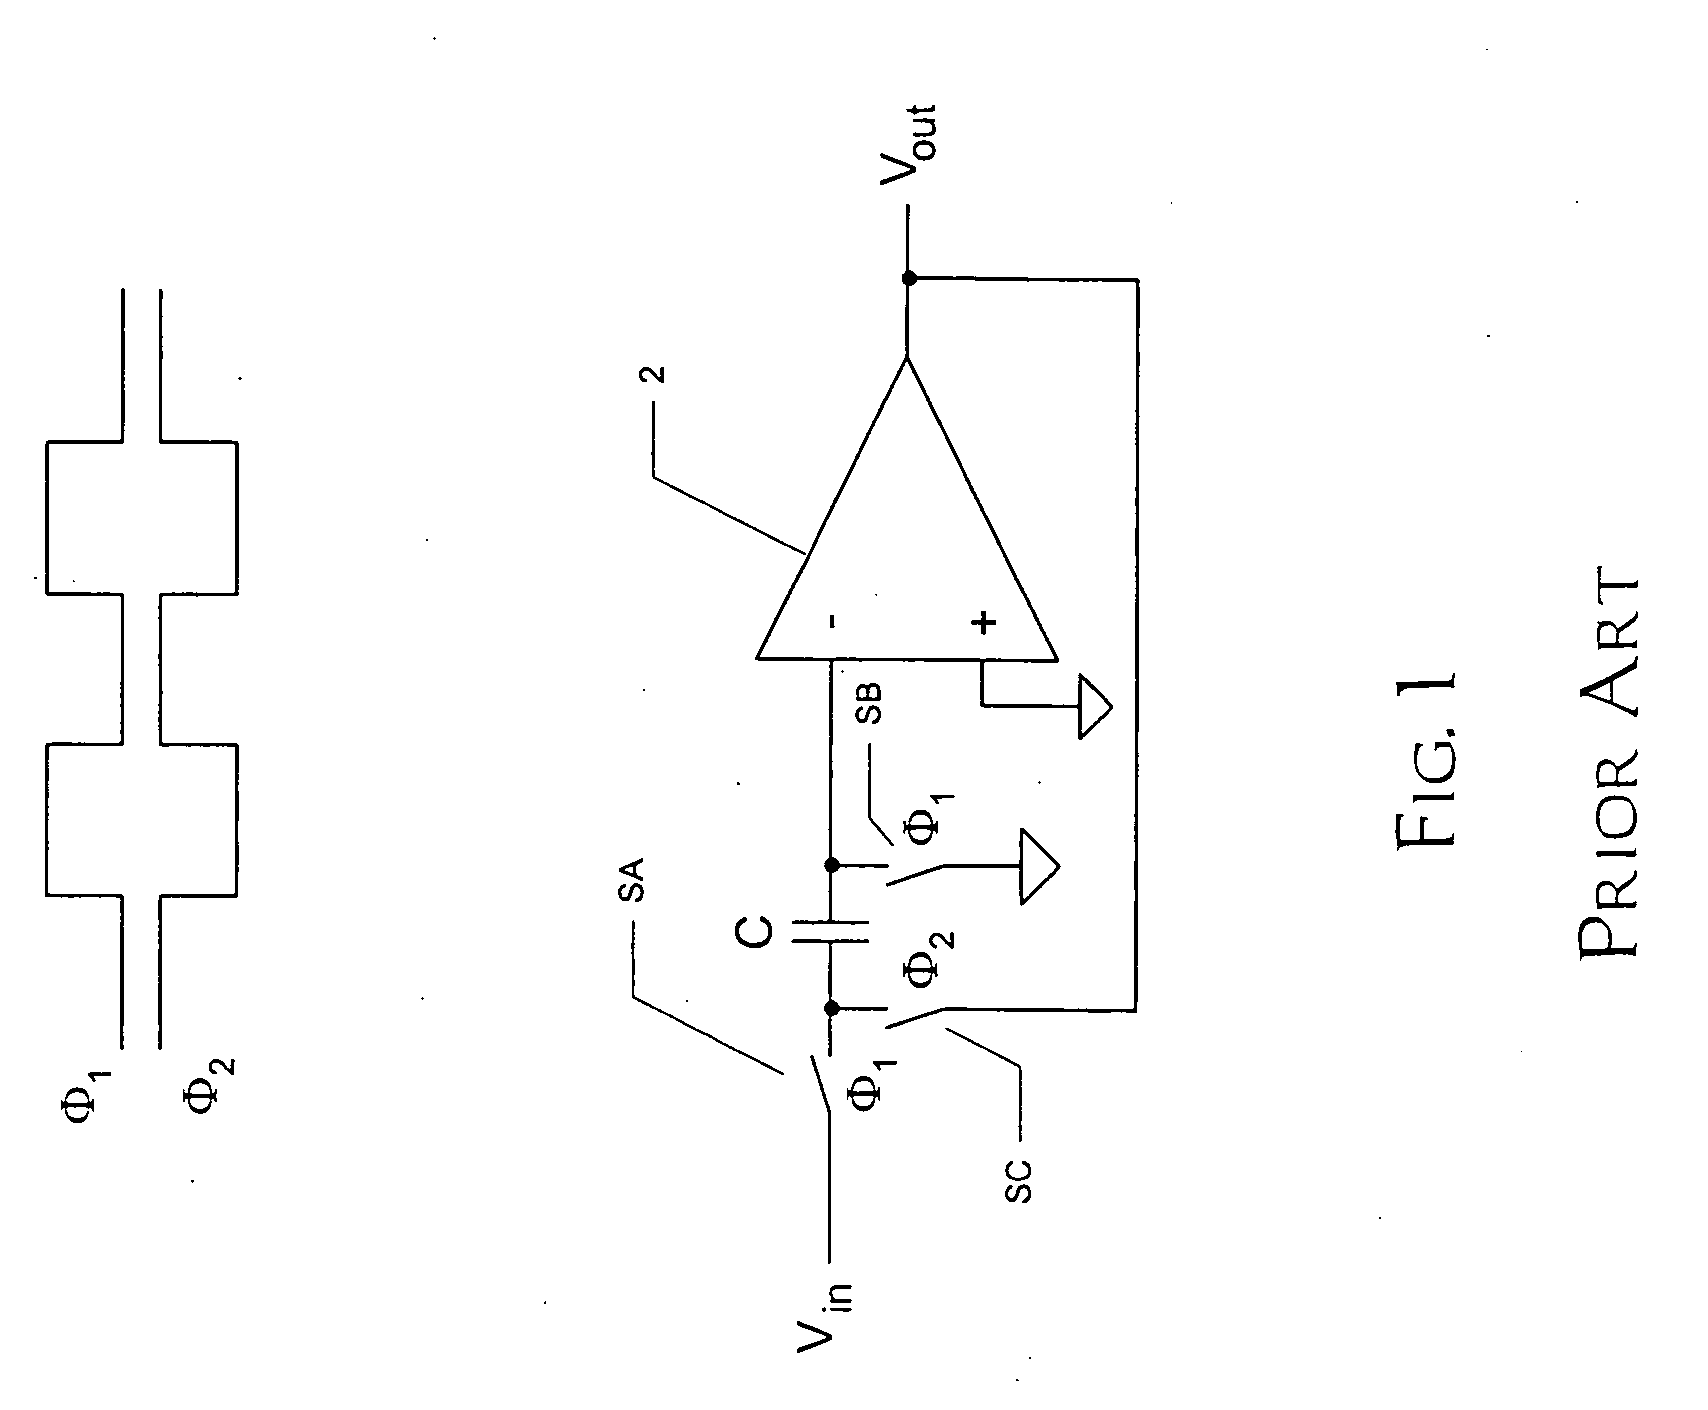 Switched-capacitor circuits with reduced finite-gain effect